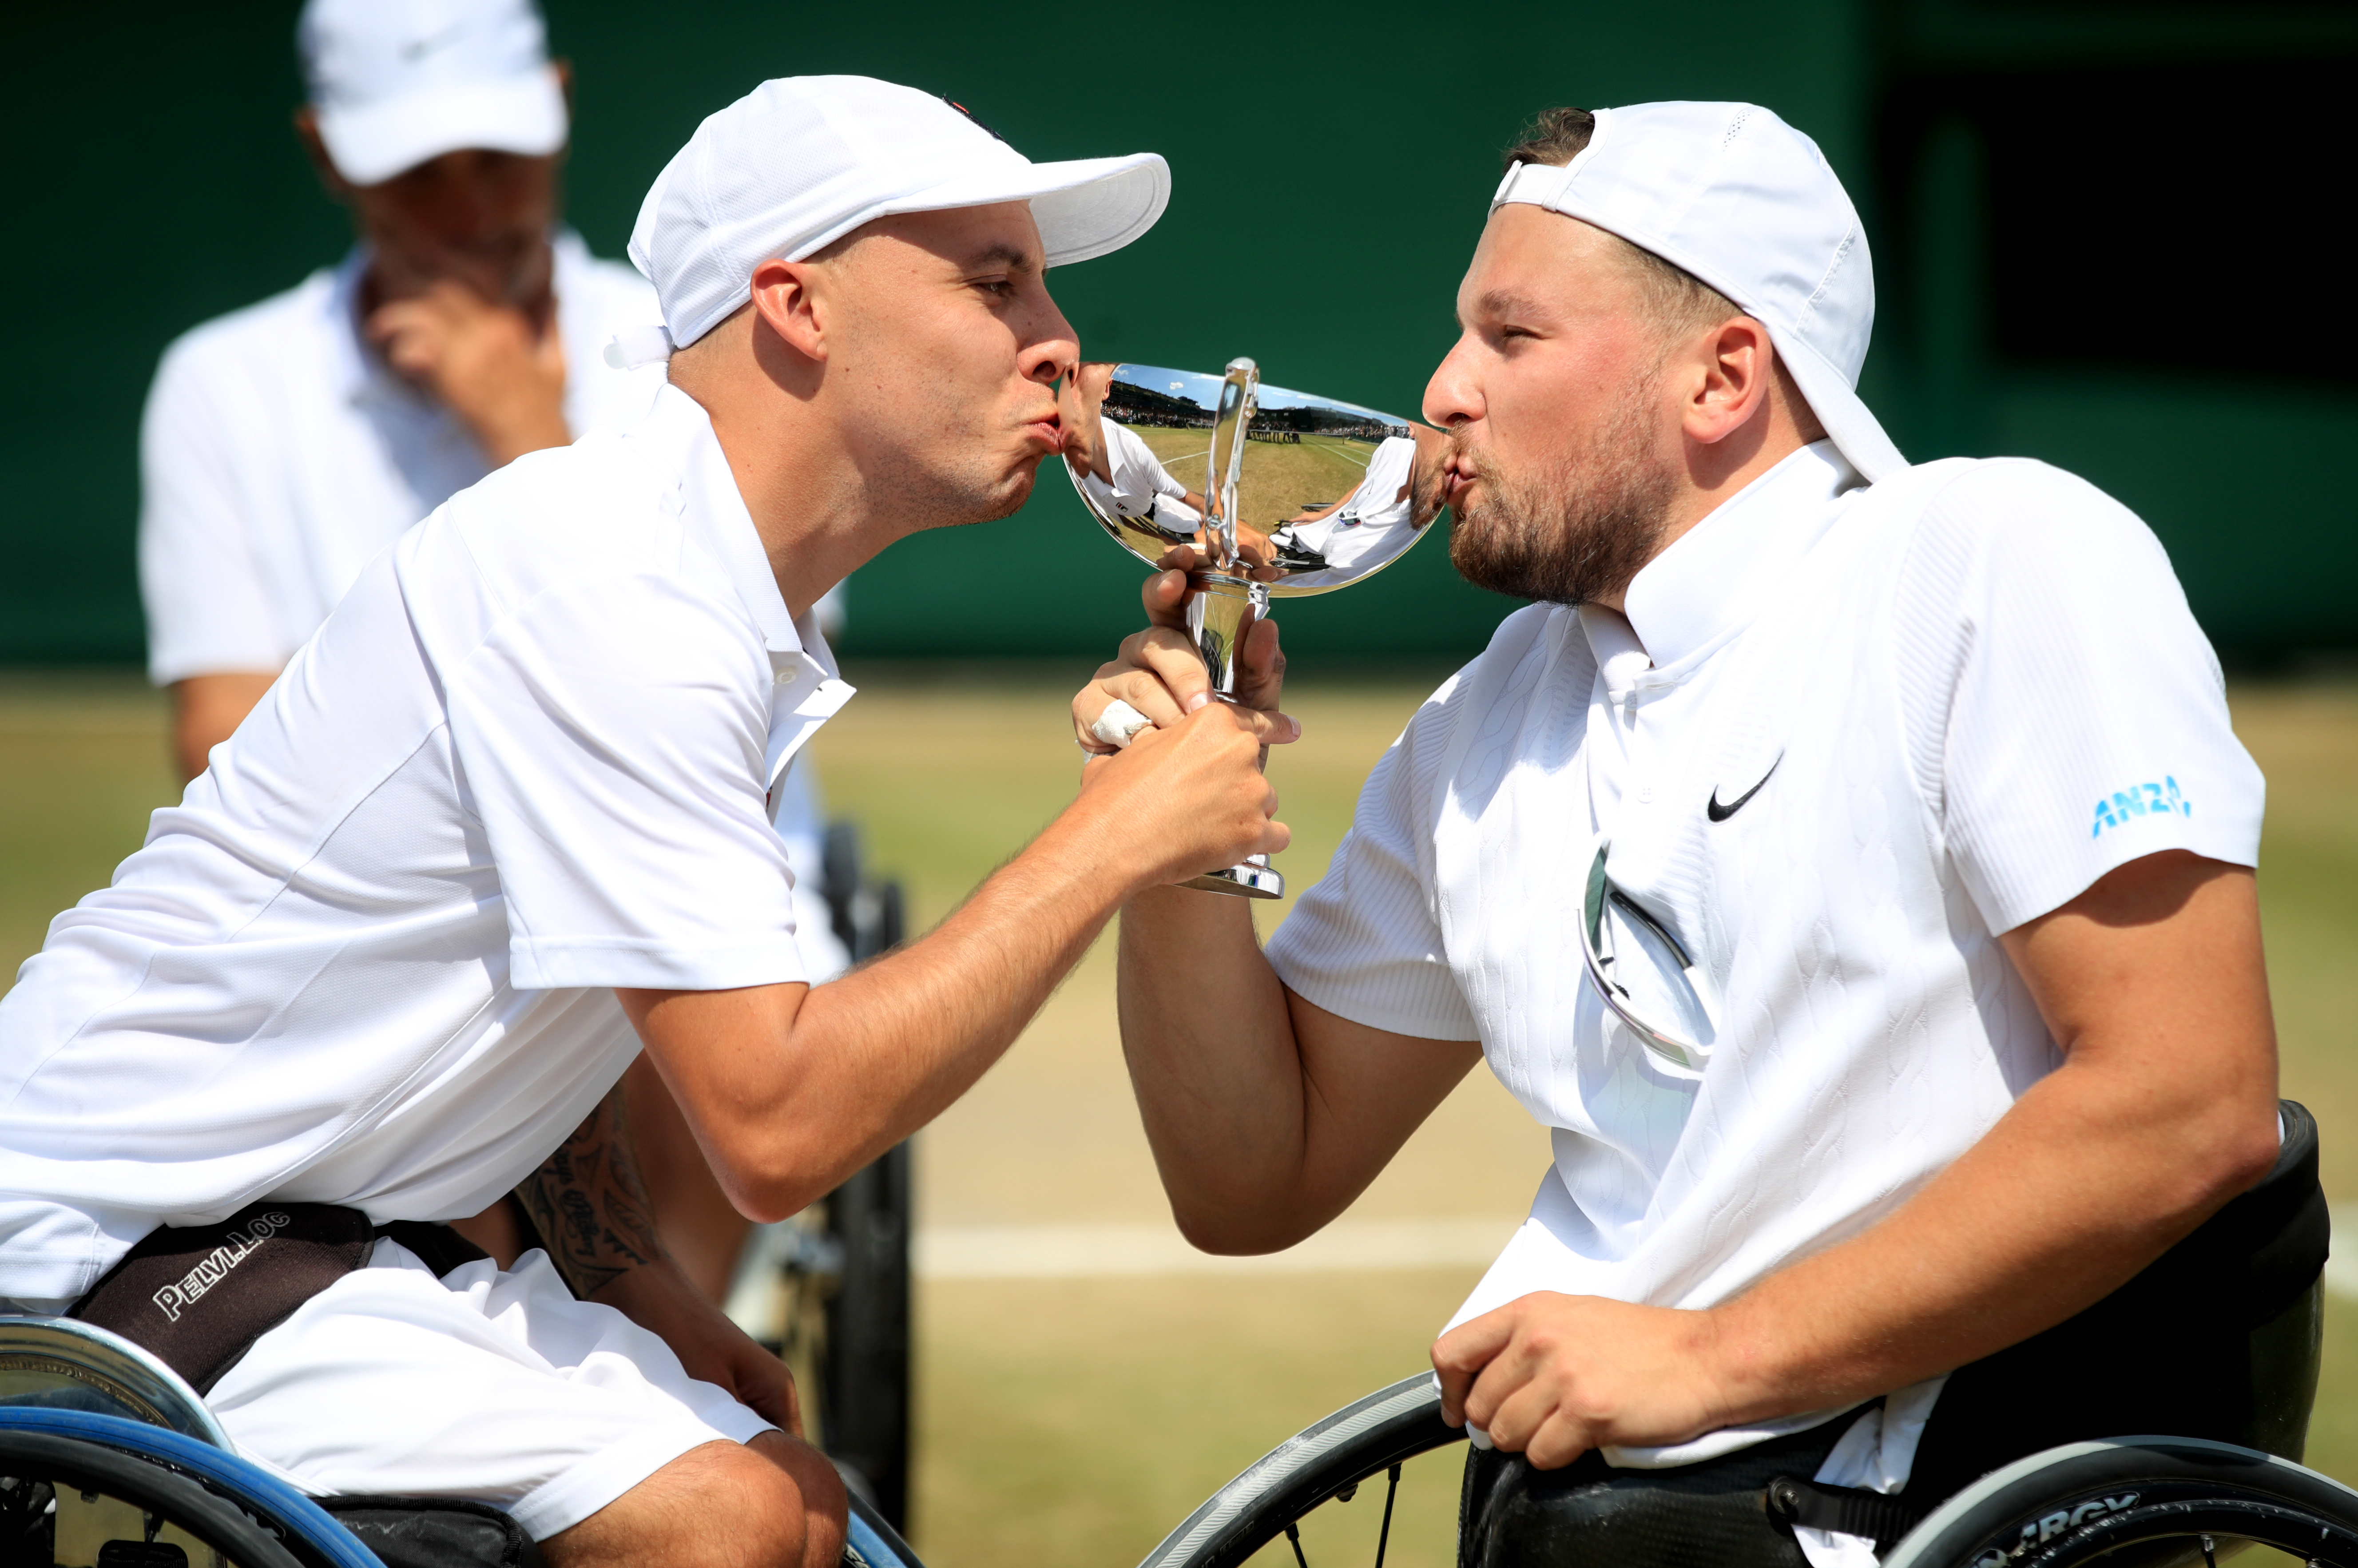 Dylan Alcott & Andy Lapthorne Just Won Wimbledon’s First-Ever Quad Wheelchair Doubles Title